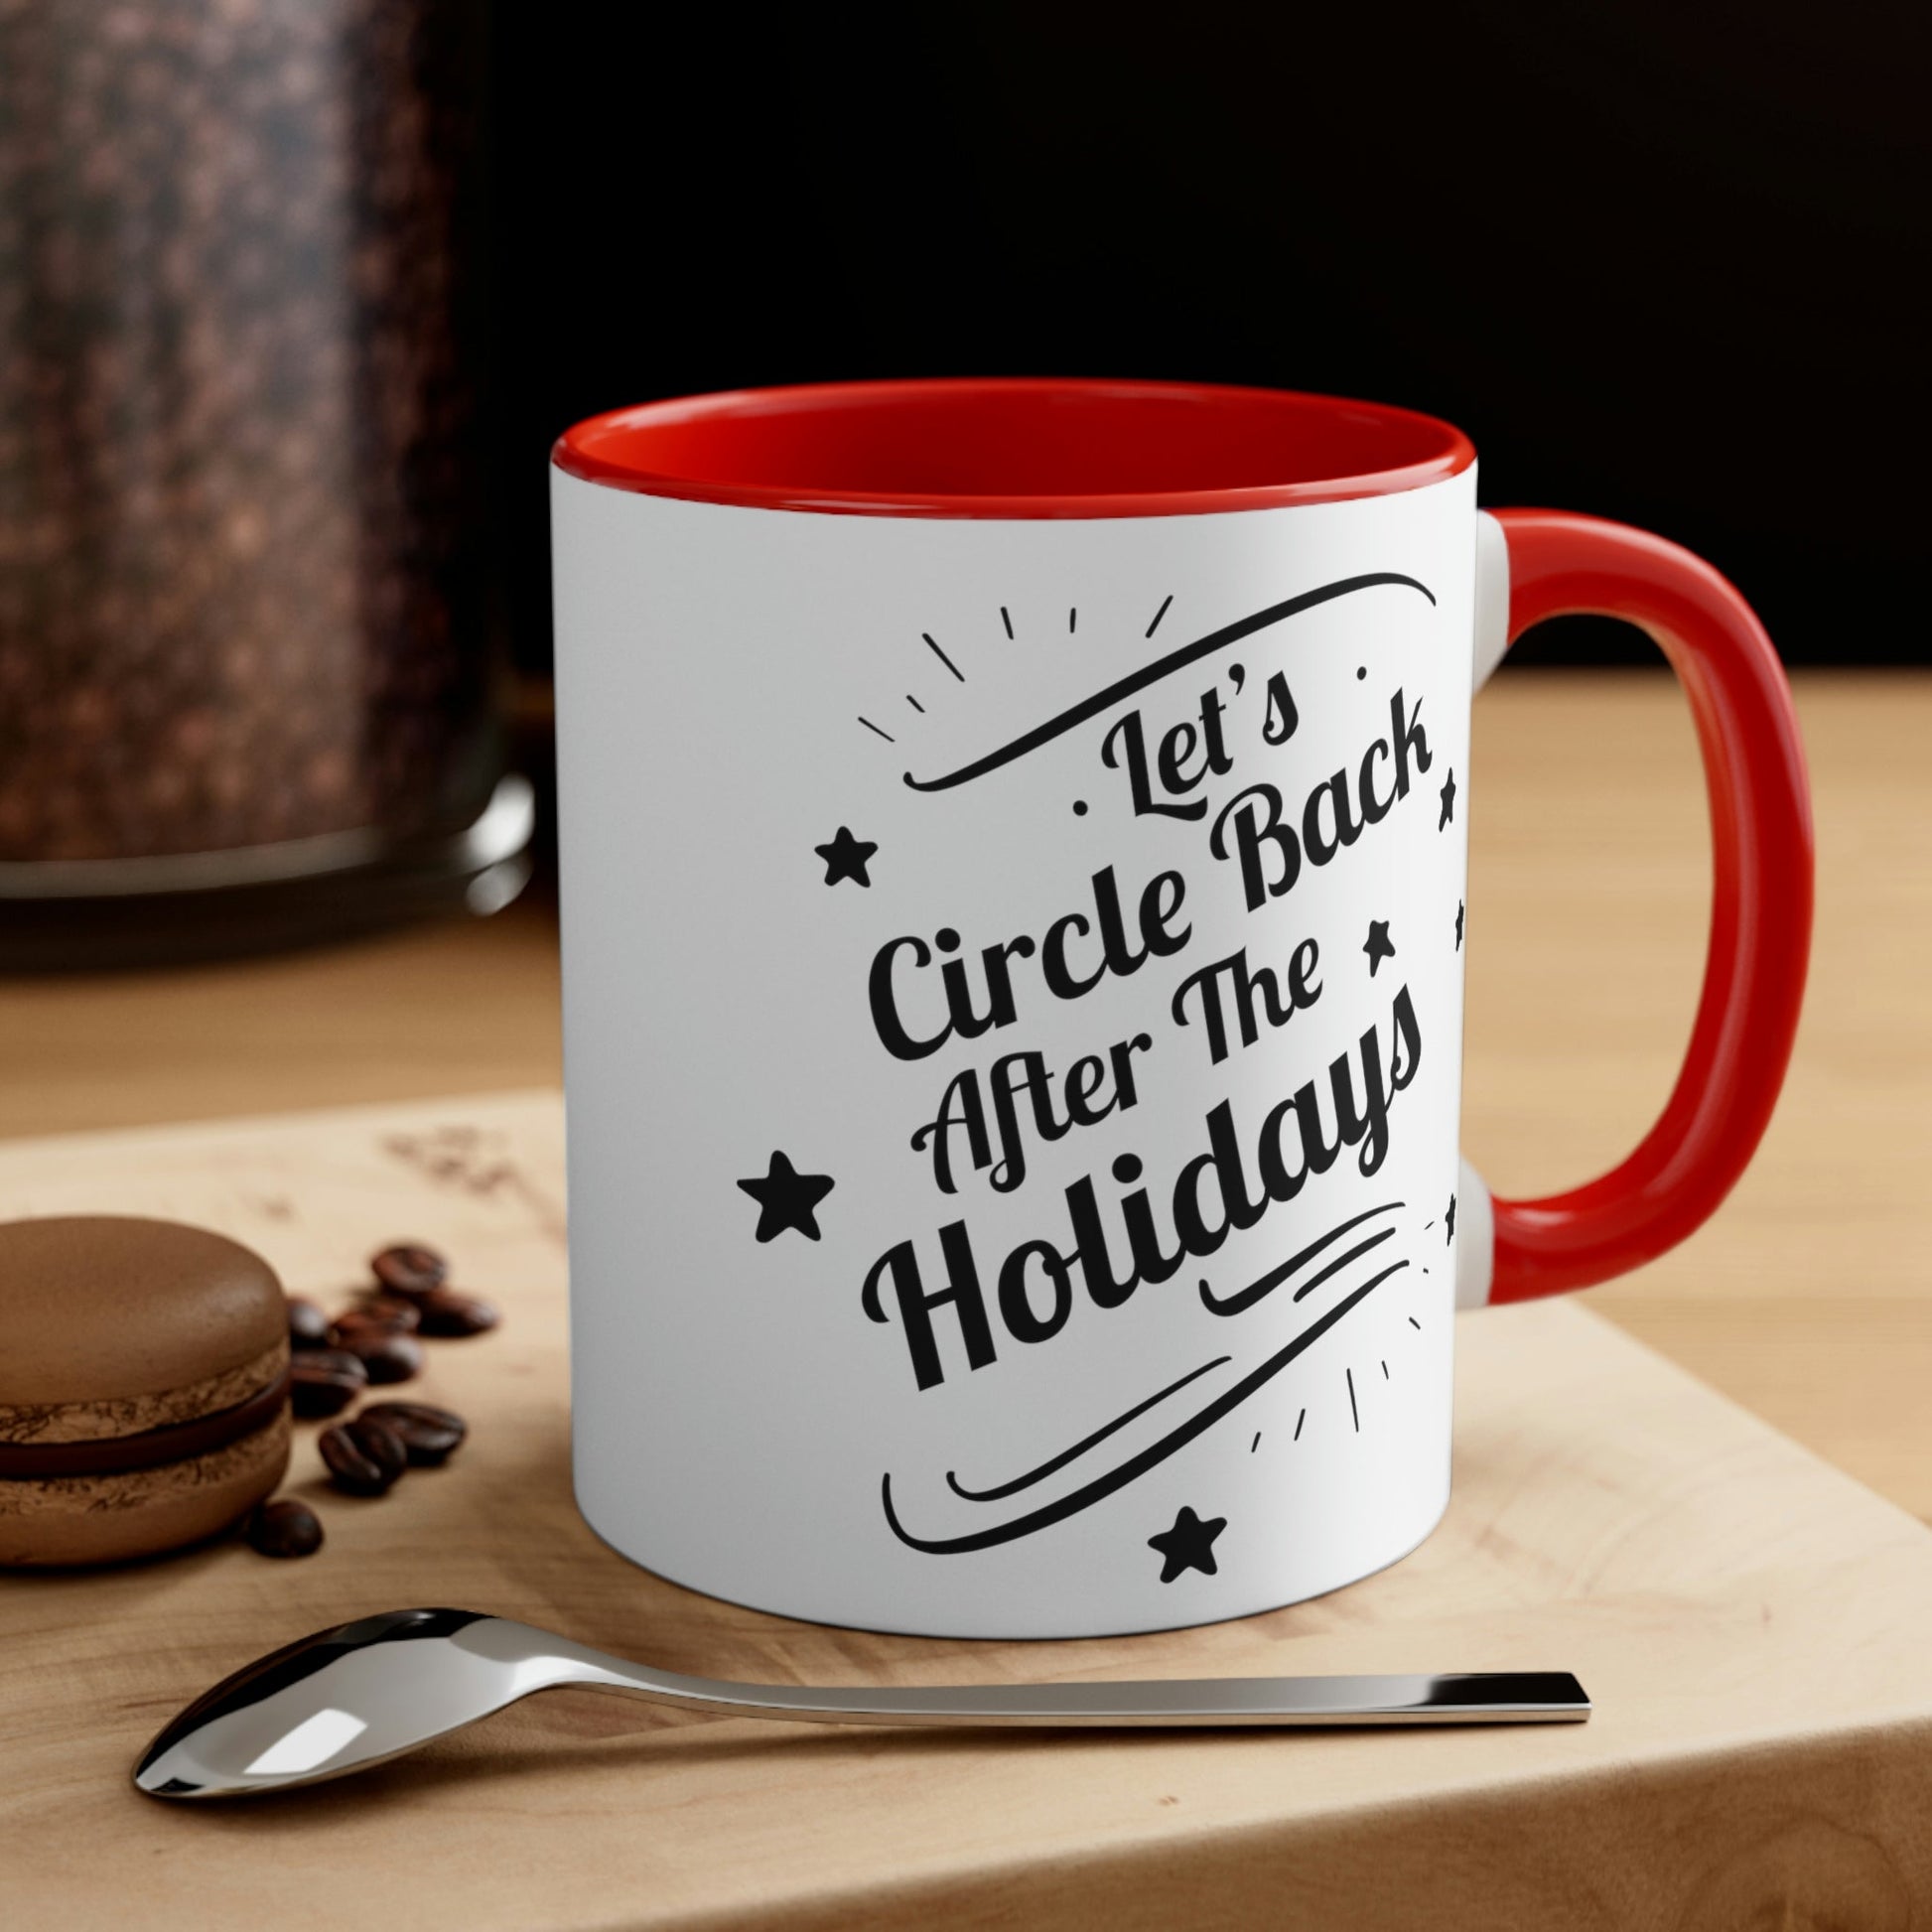 Let`s Circle Back After the Holidays Funny Christmas Quote Classic Accent Coffee Mug 11oz Ichaku [Perfect Gifts Selection]